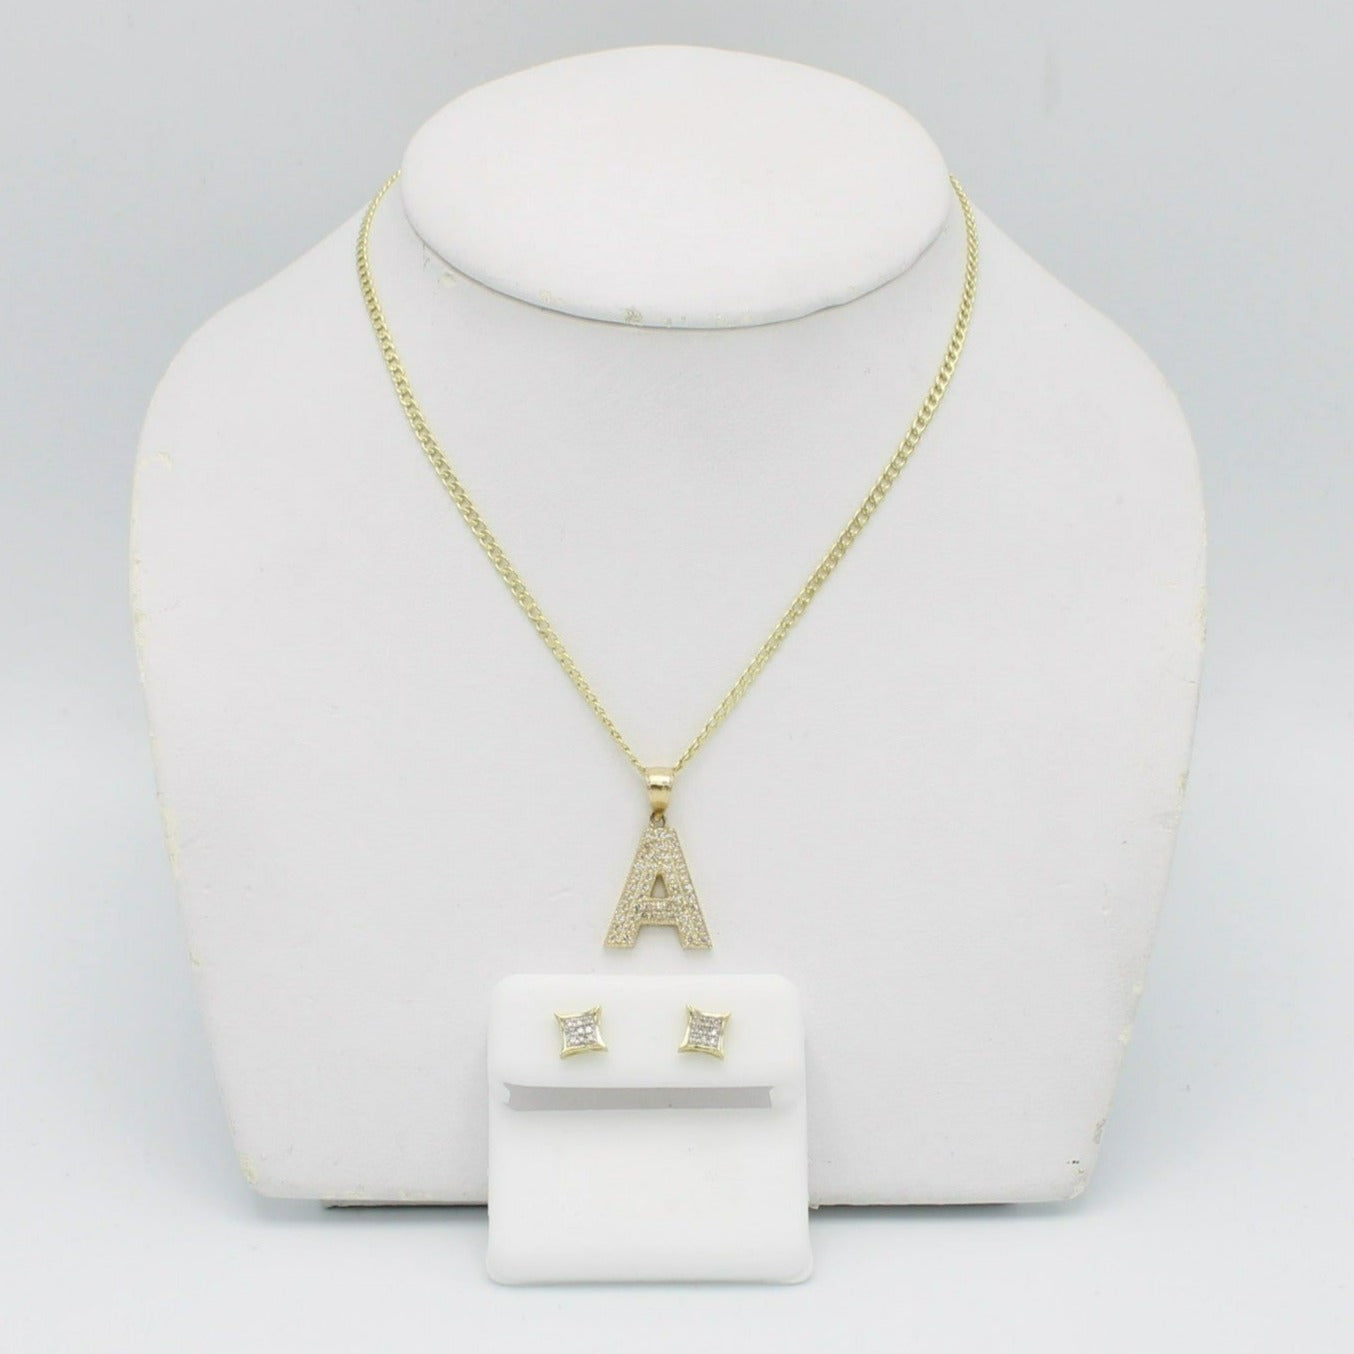 14K Initials Pendant Cz Stones With Cuban Chain Yellow Gold